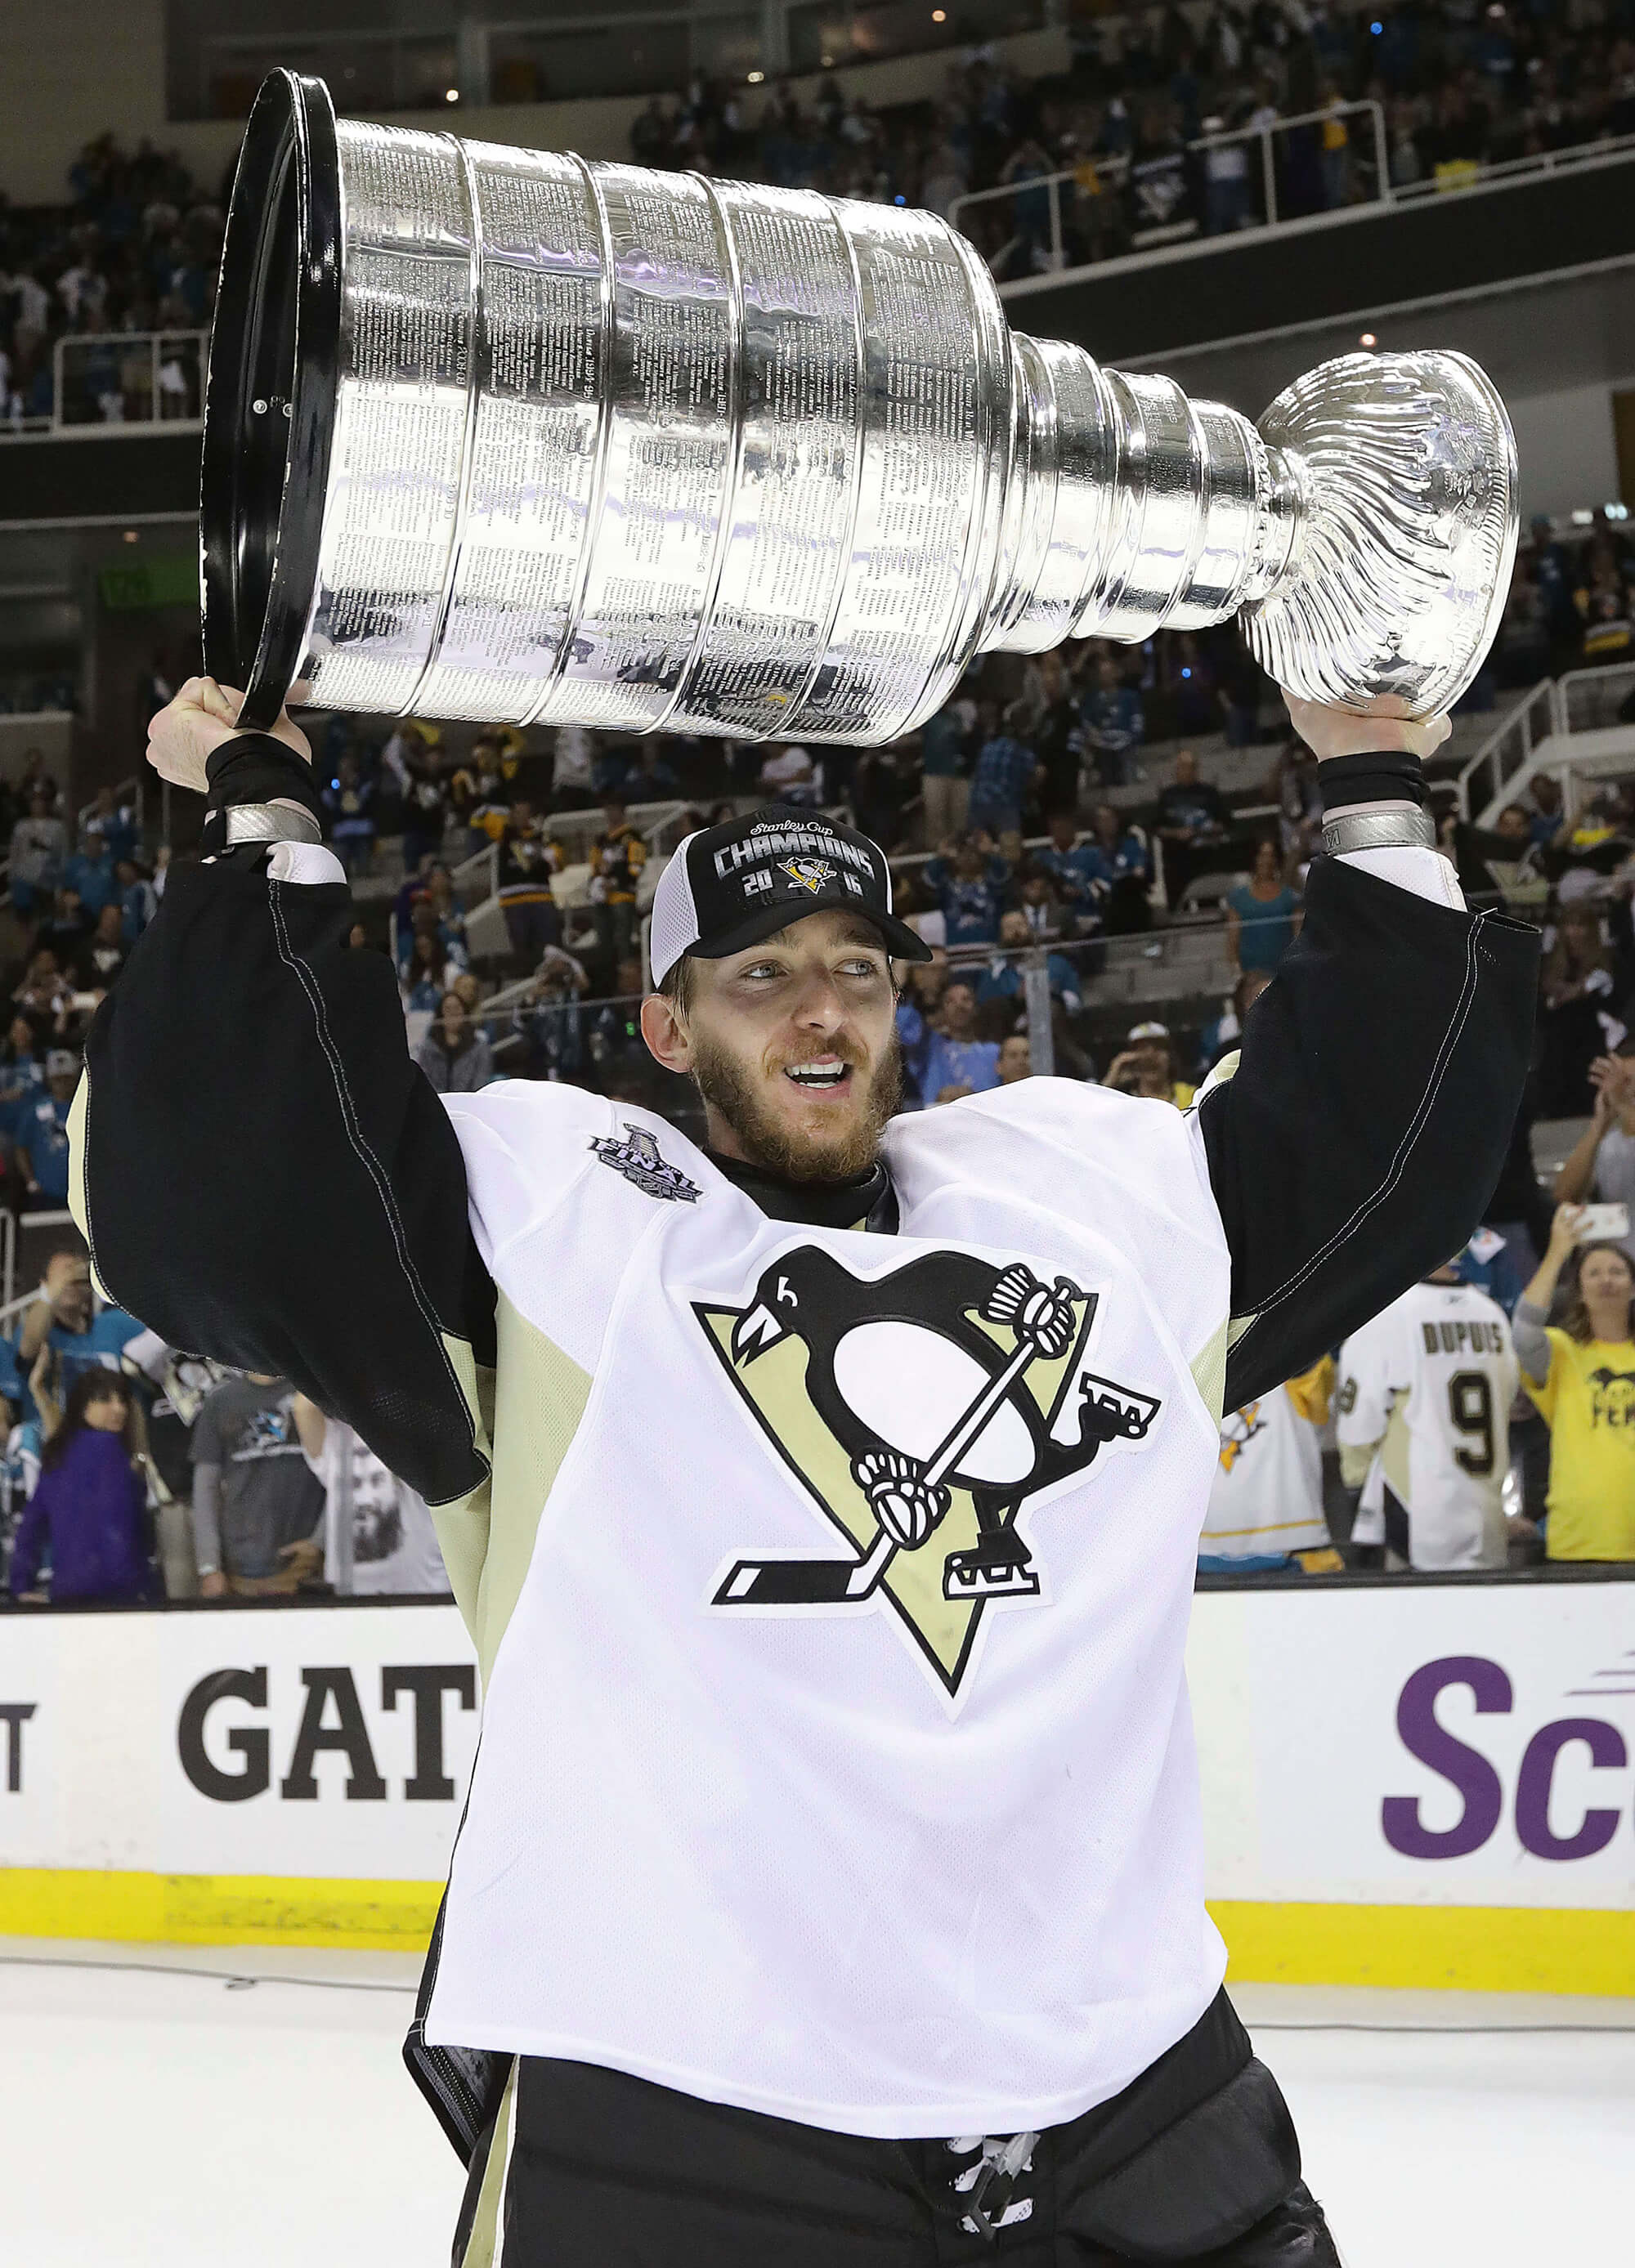 Pittsburgh Penguin player with Stanley Cup after victory